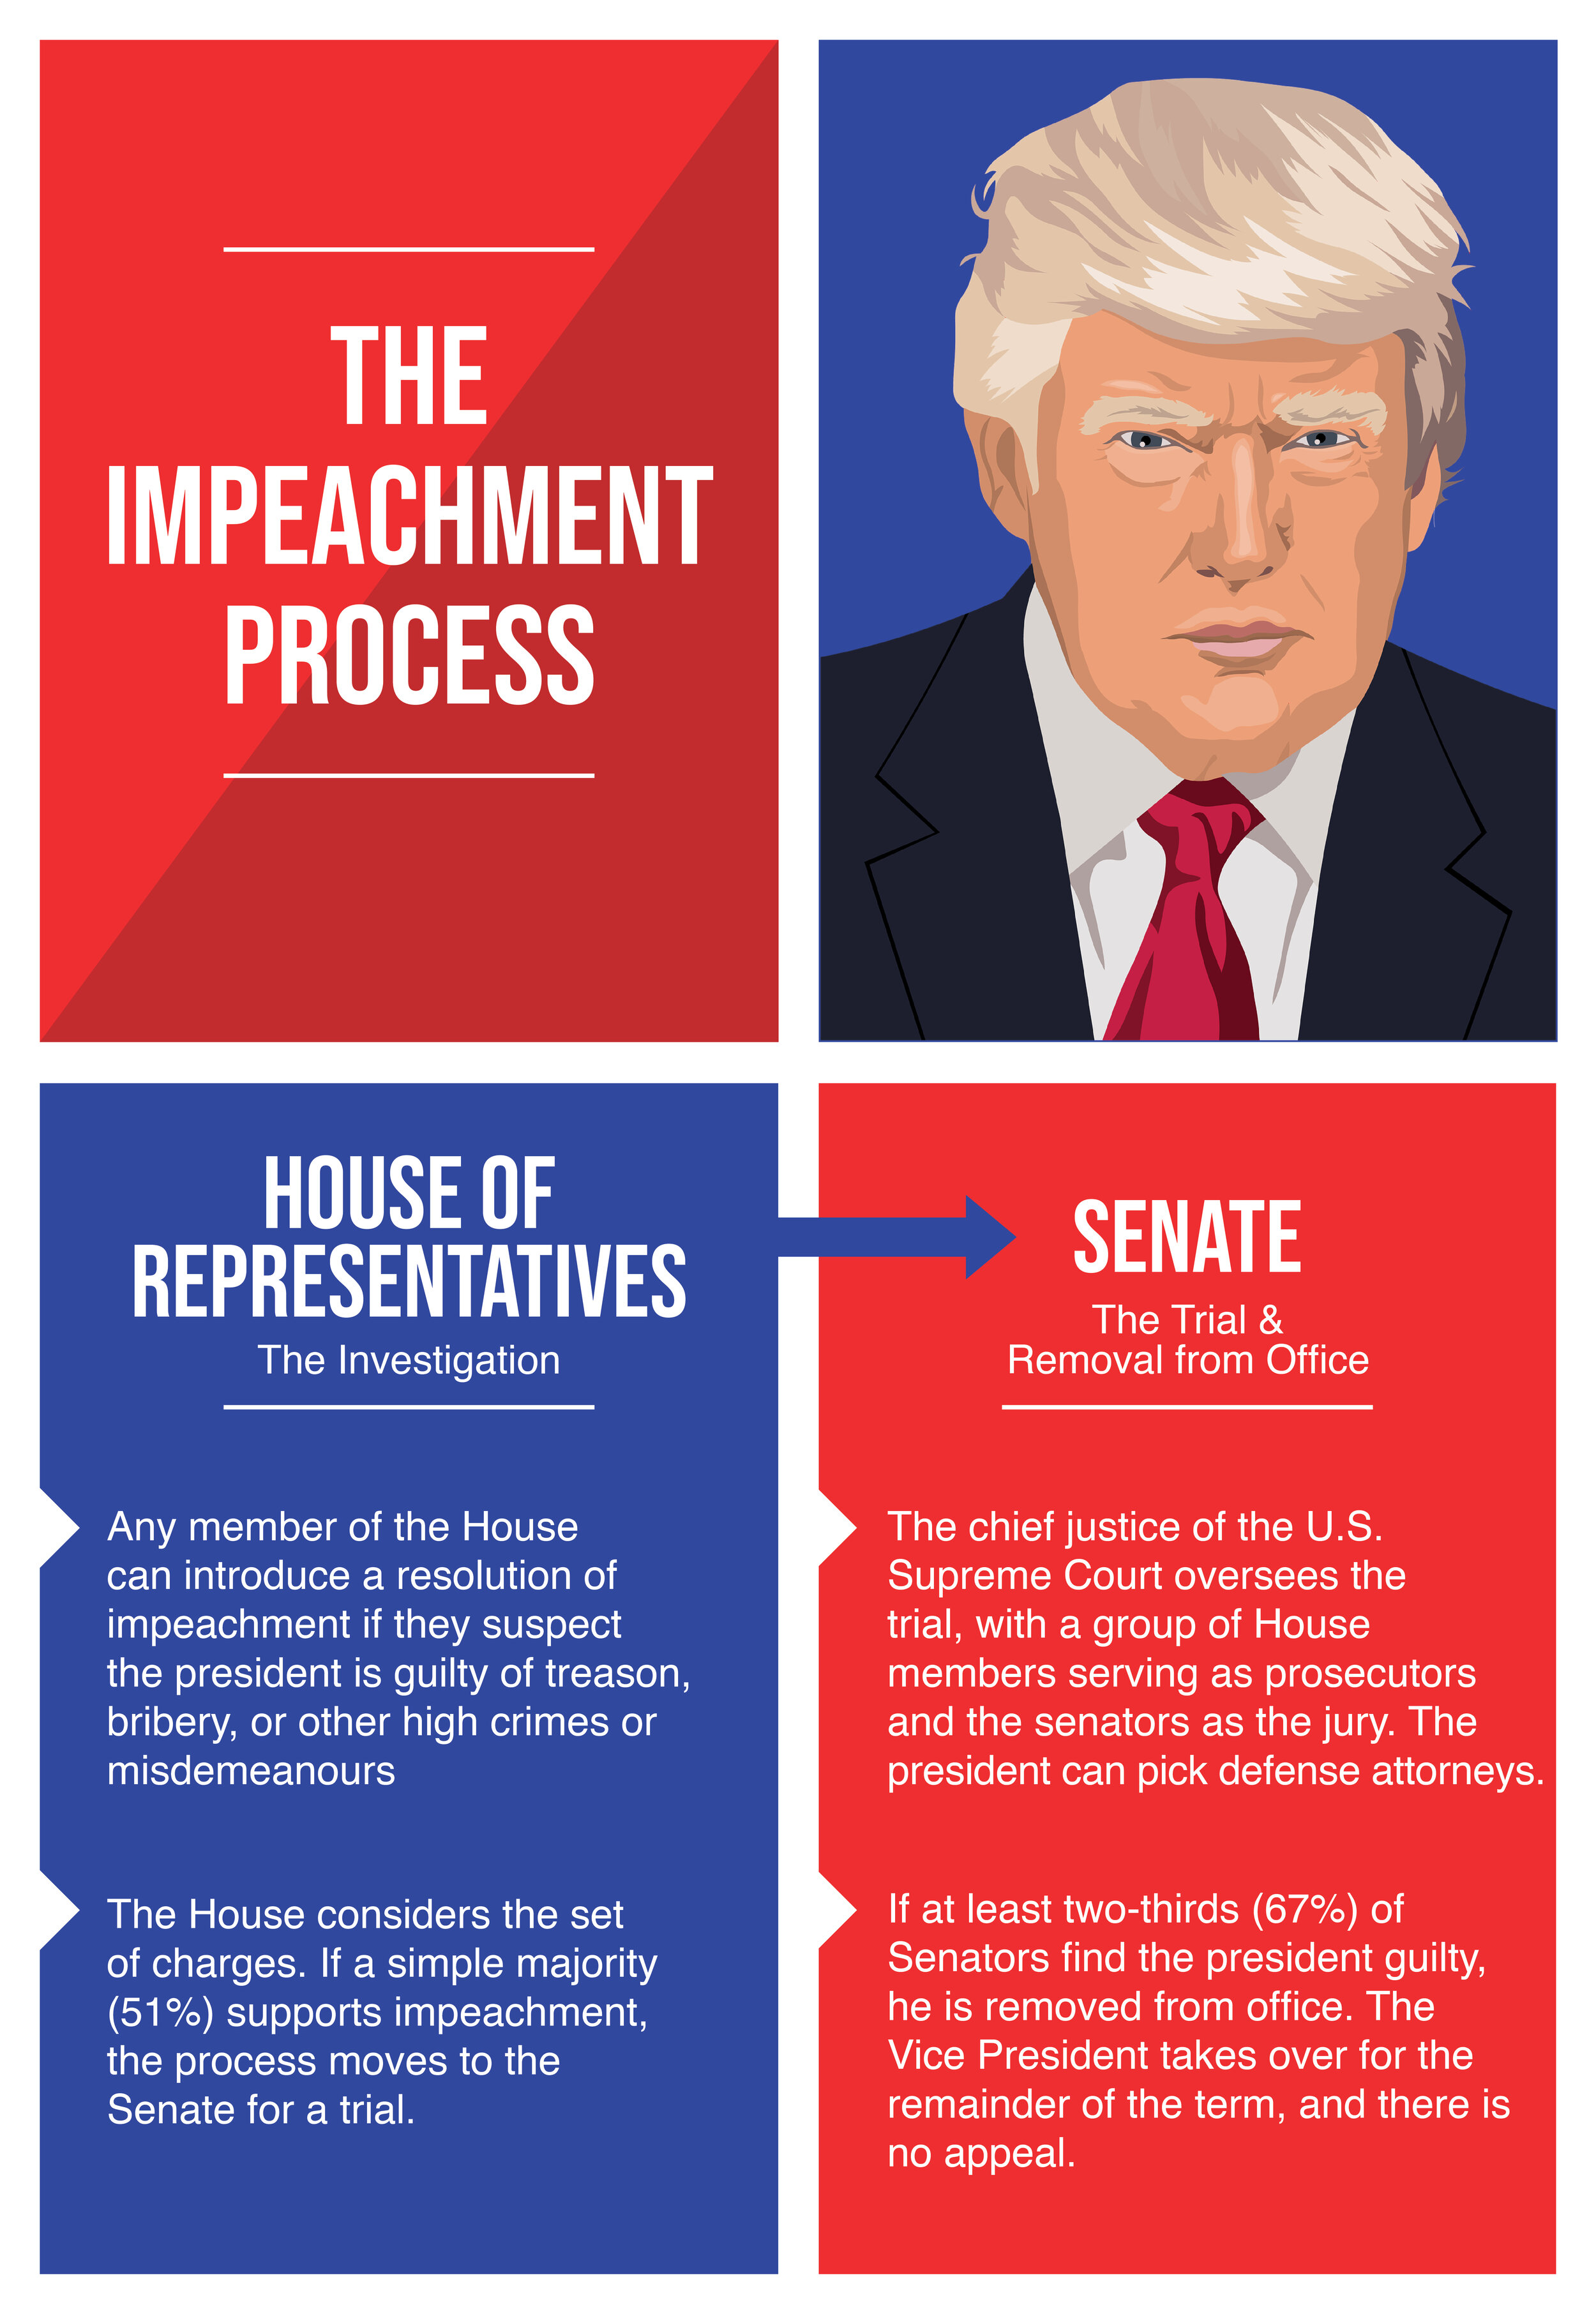 With all the talk of President Donald Trump getting impeached, here is a look at how the process of impeachment works. These steps were provided by BBC.com.